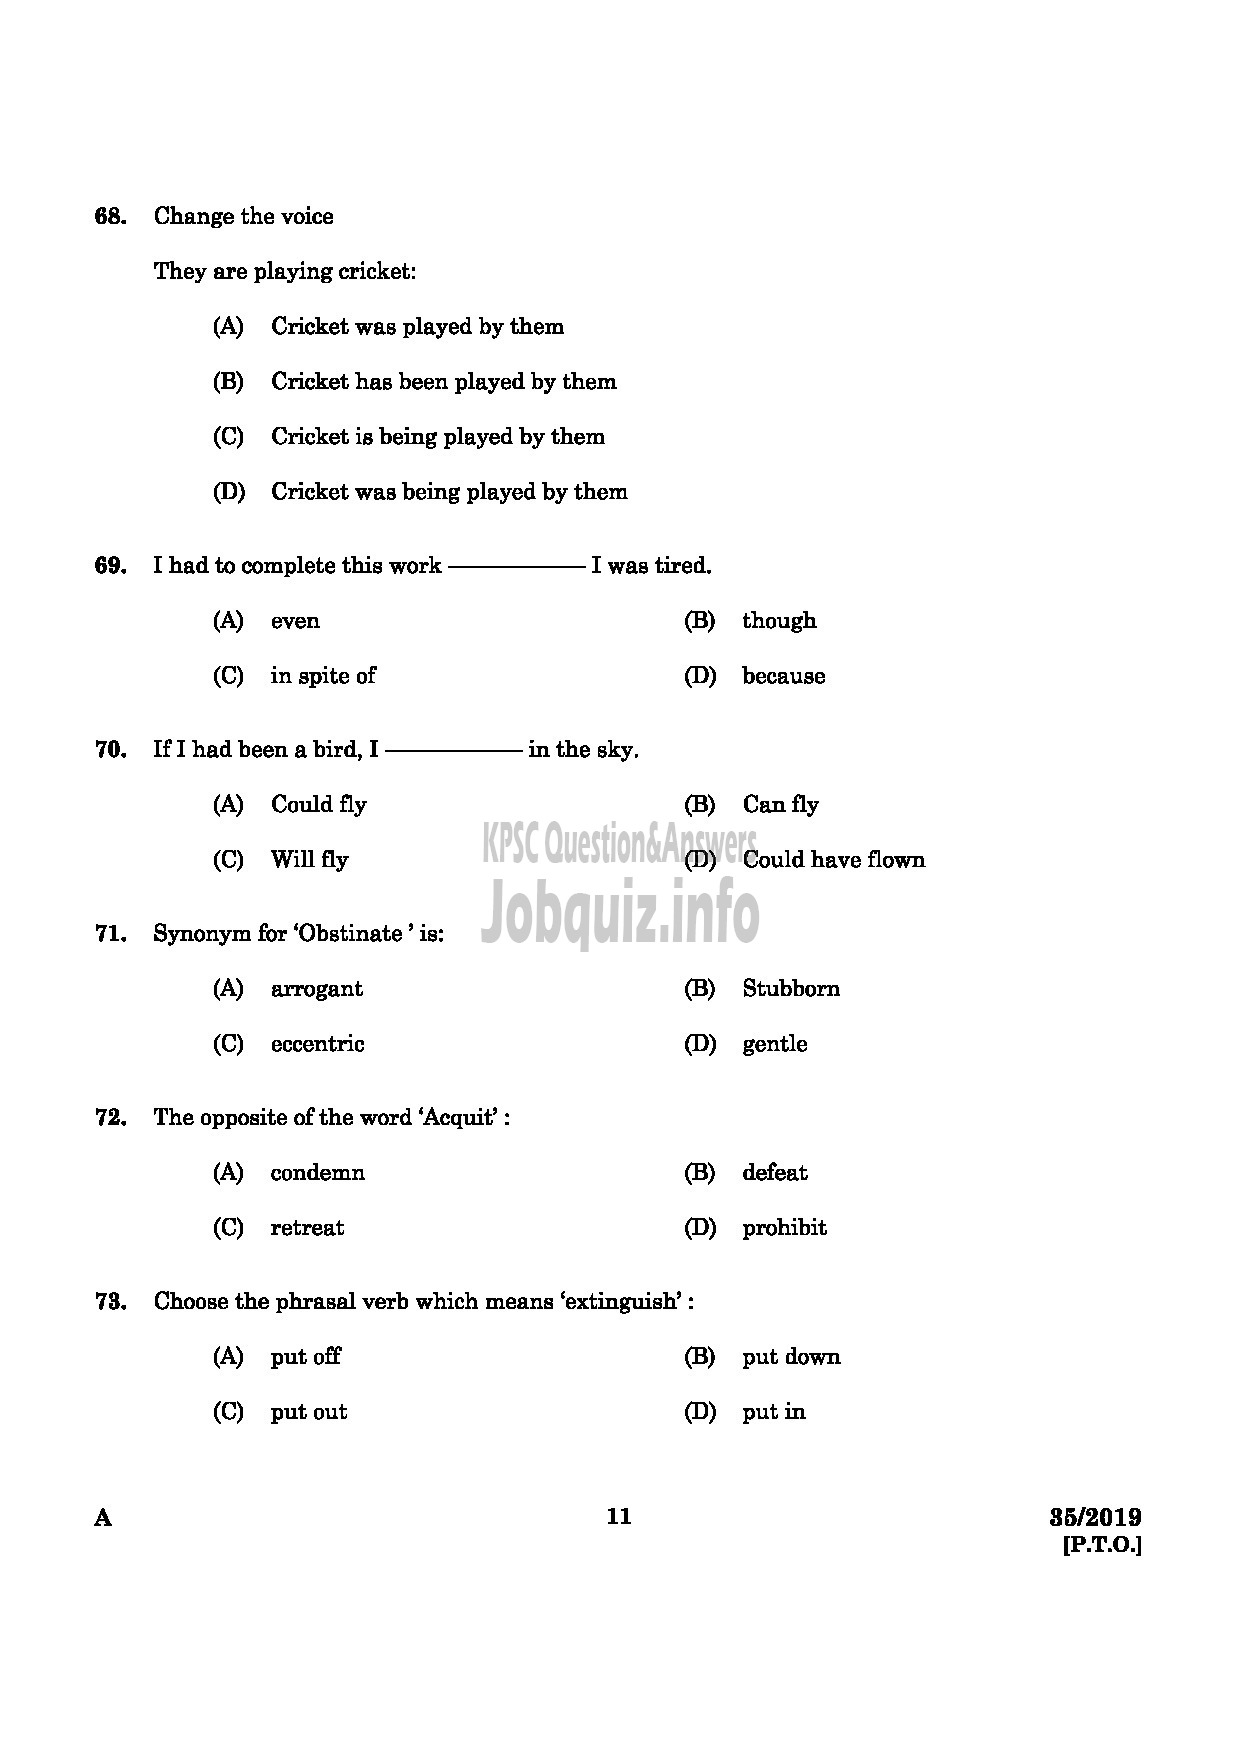 Kerala PSC Question Paper - Women Civil Excise Officer Excise English -9